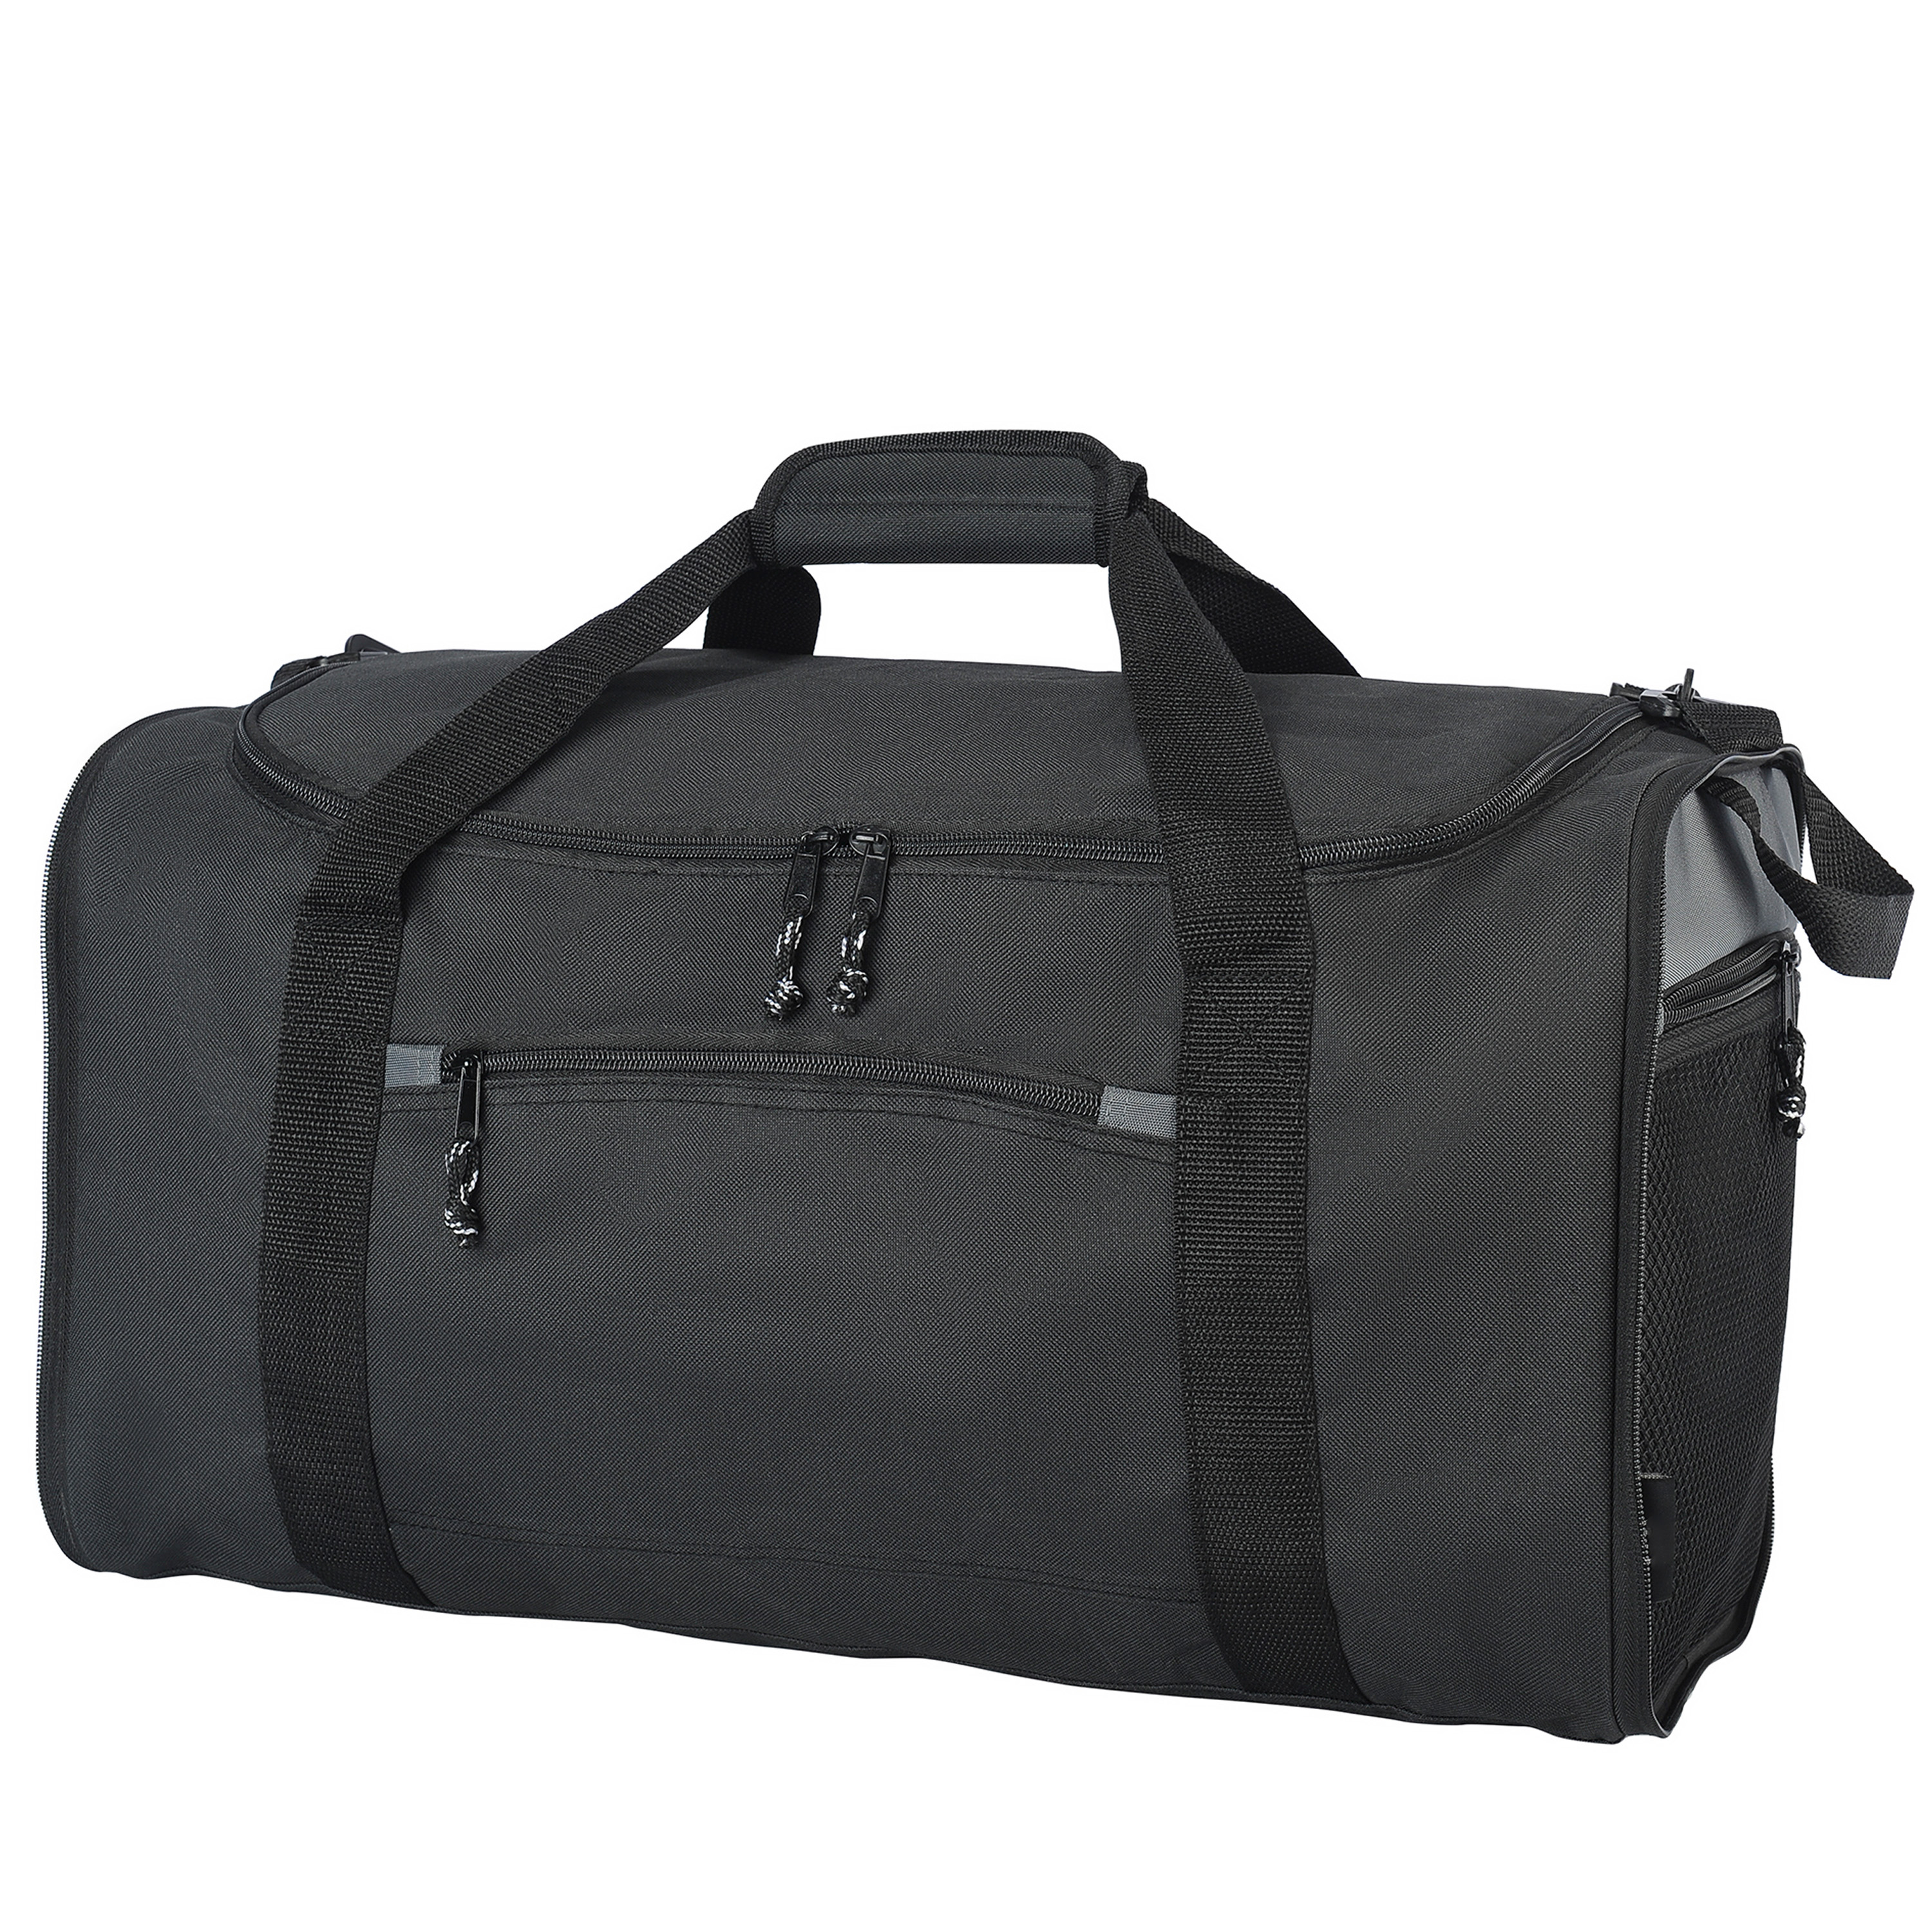 Protégé 20" Collapsible Sport and Travel Duffel Bag, Black - image 1 of 11